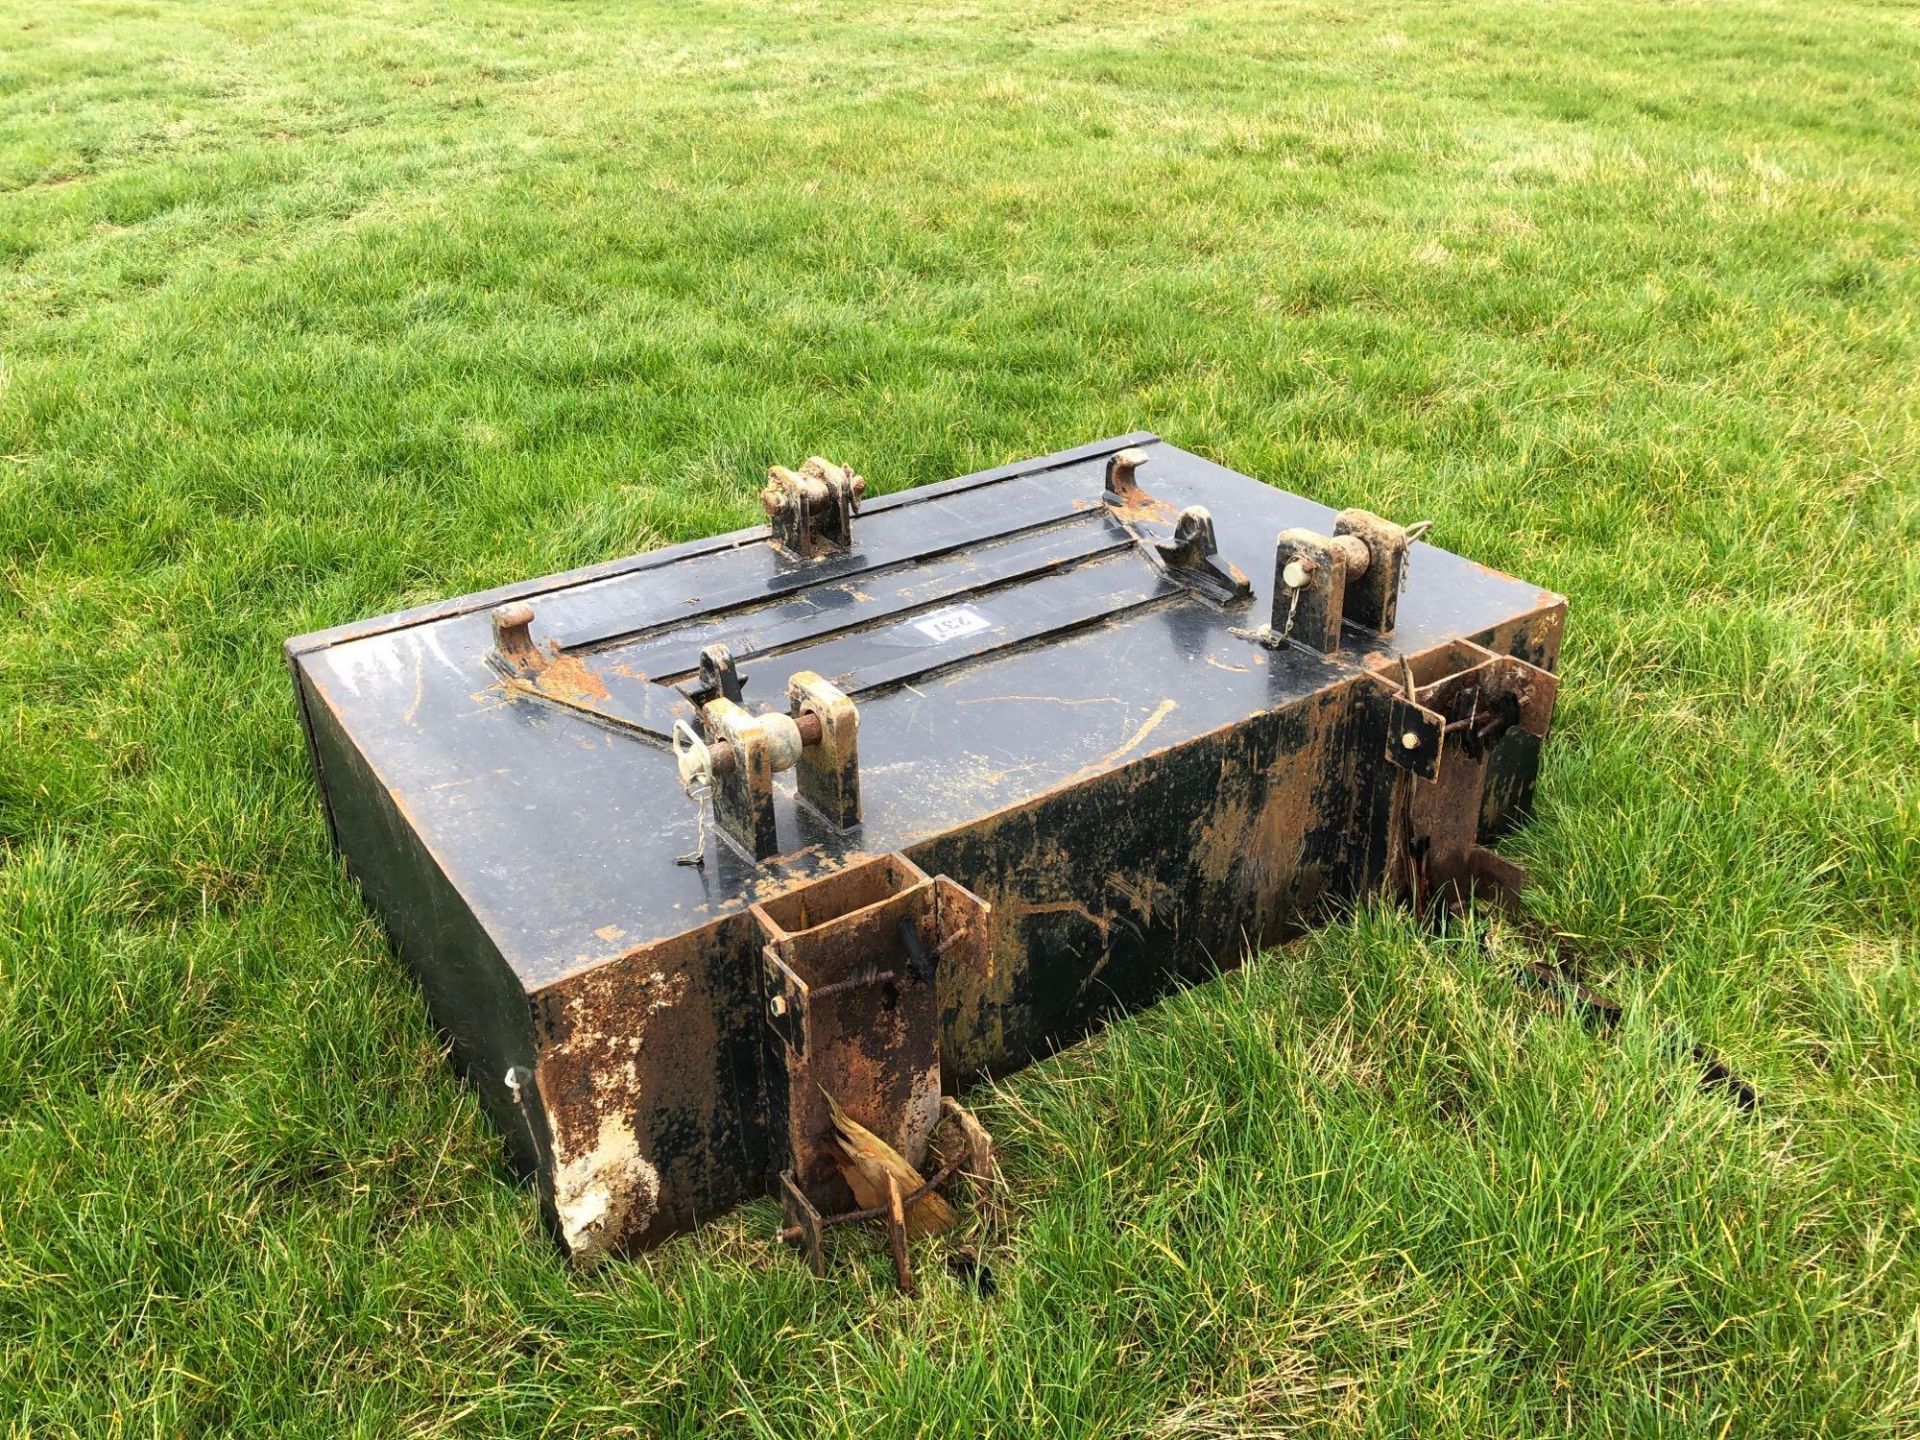 Ballast block with linkage mounted and loader bracket attachments - Image 2 of 2